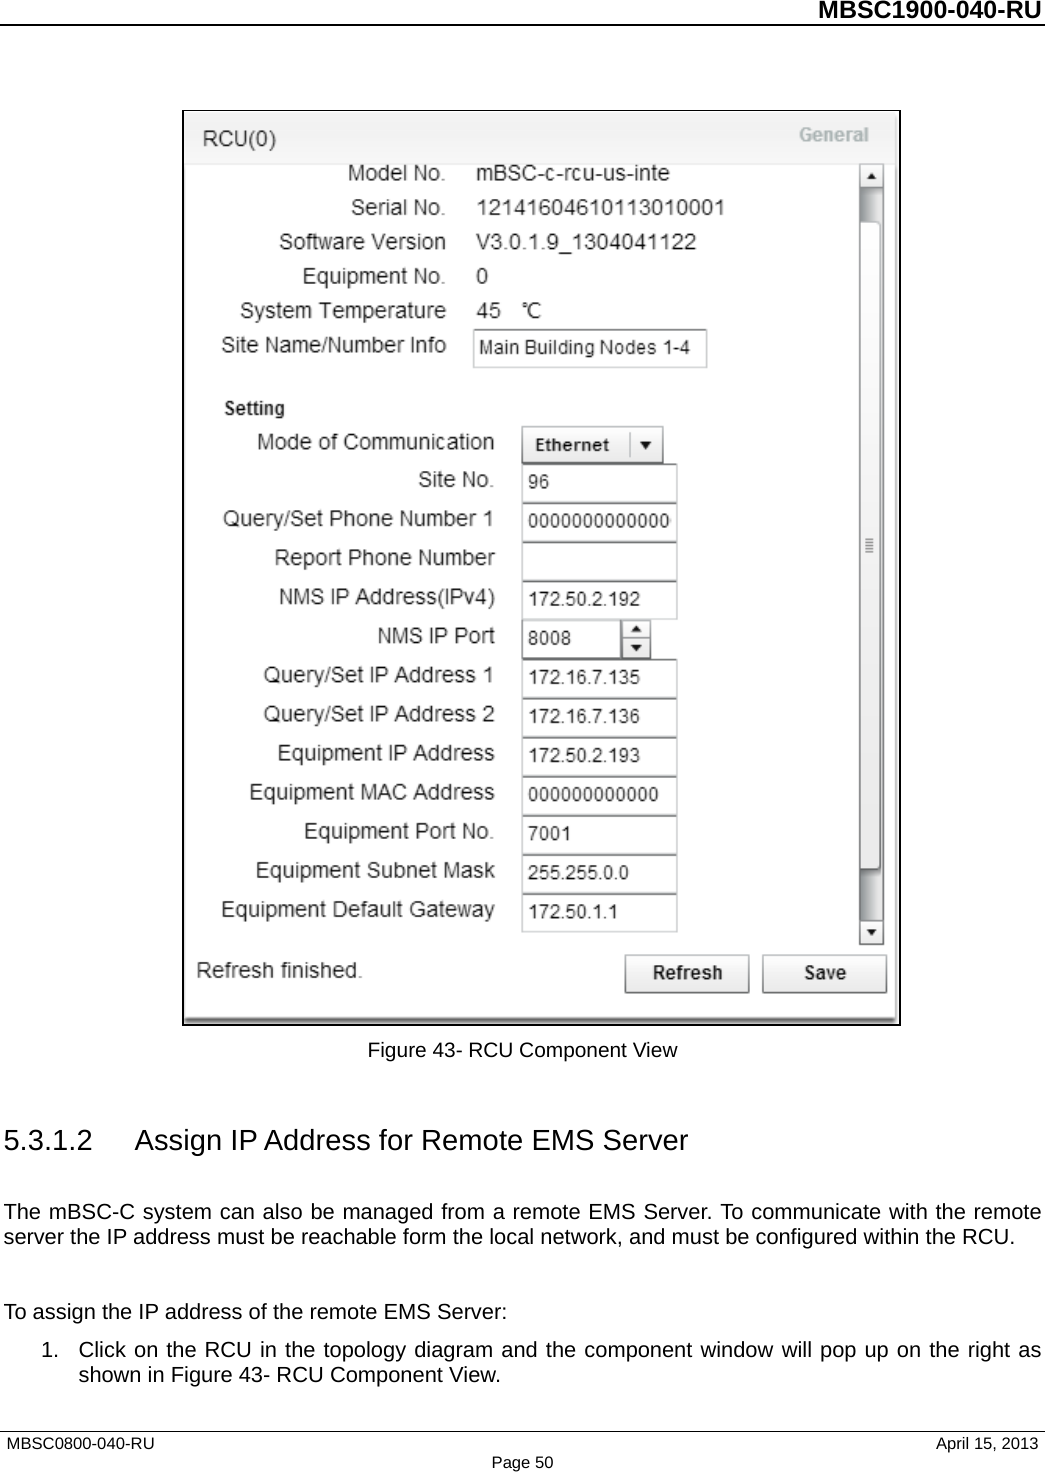          MBSC1900-040-RU    Figure 43- RCU Component View  5.3.1.2 Assign IP Address for Remote EMS Server The mBSC-C system can also be managed from a remote EMS Server. To communicate with the remote server the IP address must be reachable form the local network, and must be configured within the RCU.  To assign the IP address of the remote EMS Server: 1. Click on the RCU in the topology diagram and the component window will pop up on the right as shown in Figure 43- RCU Component View. MBSC0800-040-RU                                      April 15, 2013 Page 50 